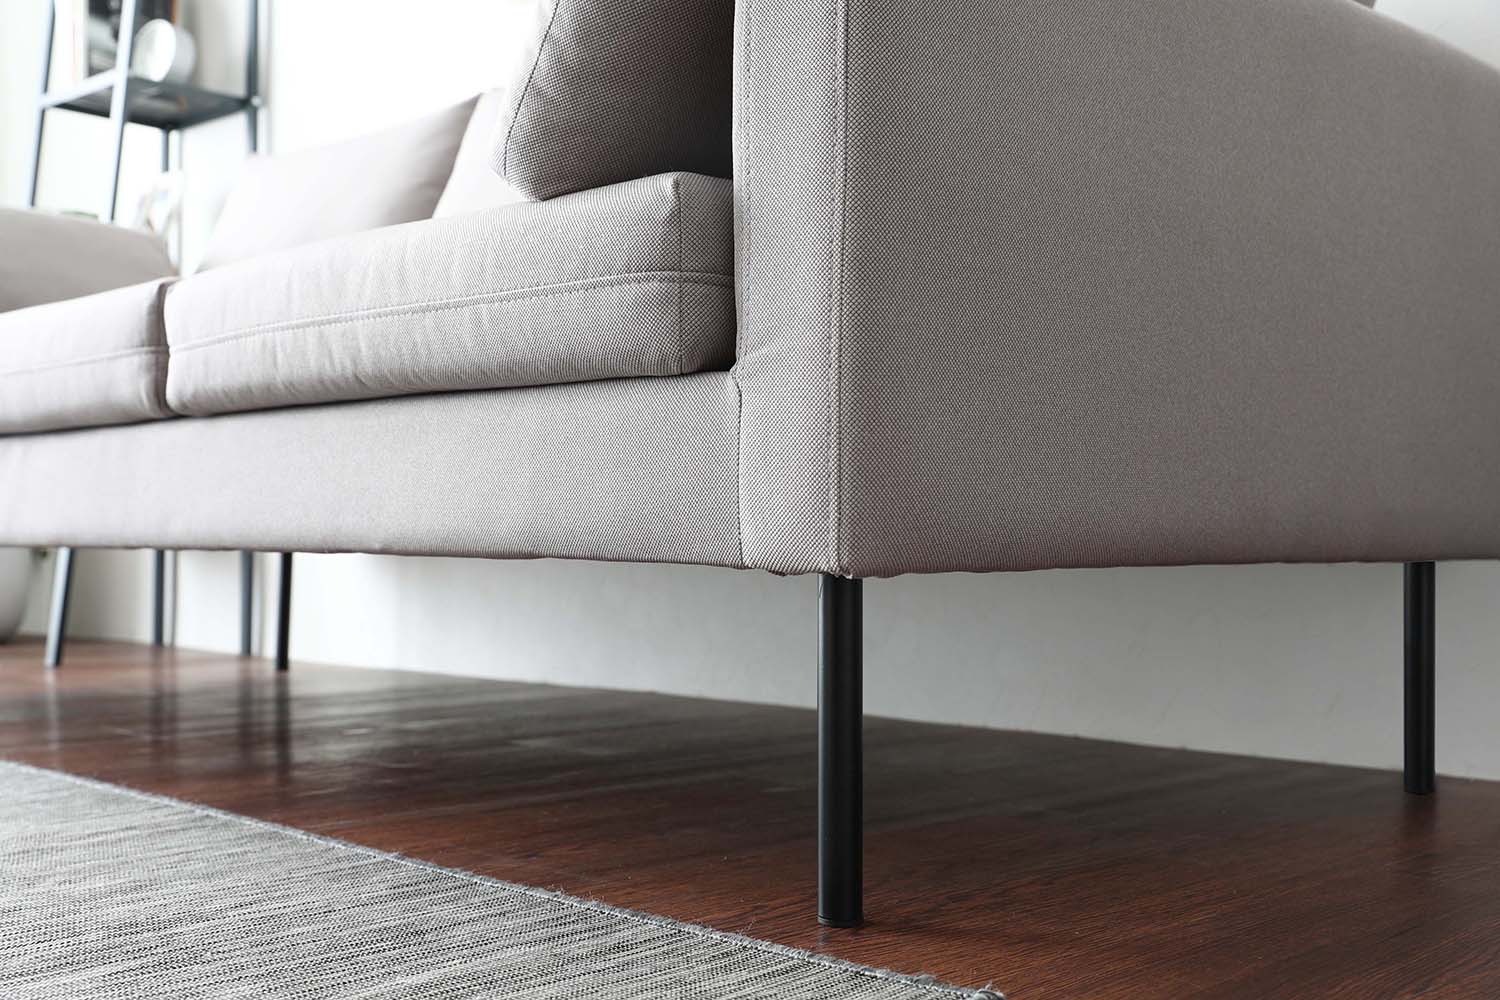 Embracing its straight silhouette and forming continuity, the Luna sofa is supported by matte-black metal legs.